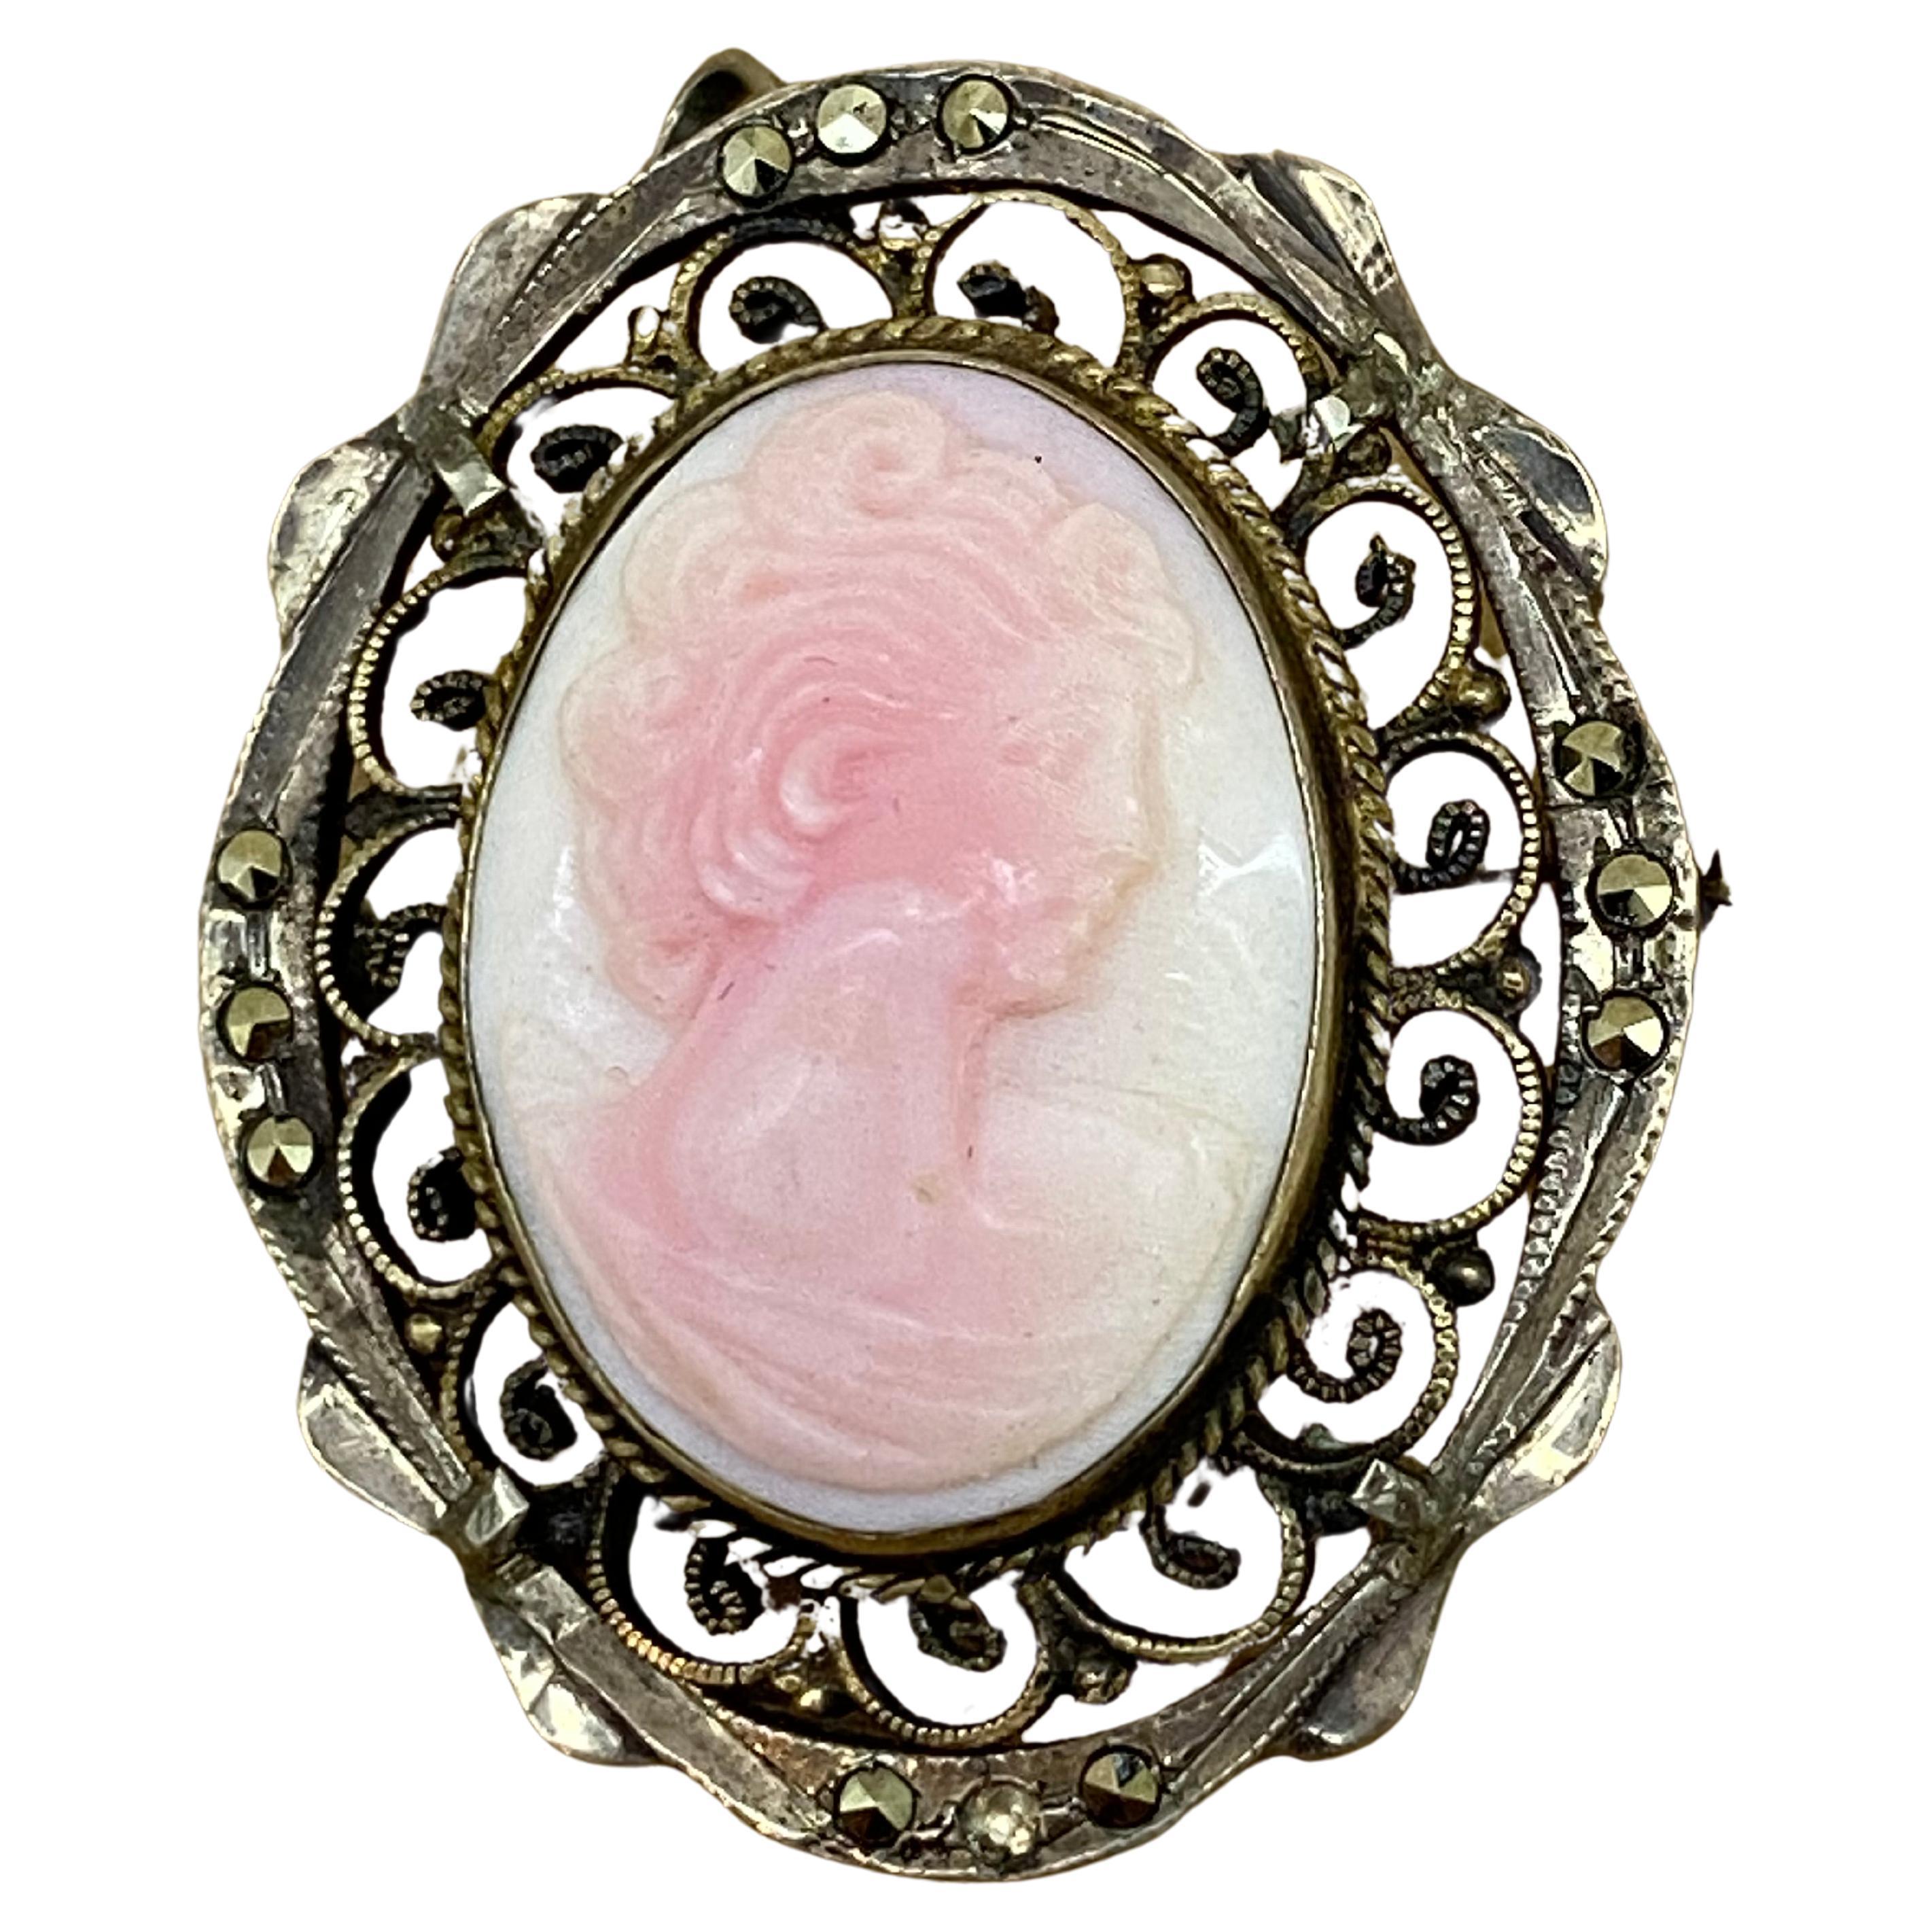 Retro 1950's Finely Carved Pinkish White Coral Silver Cameo Brooch / Pendant